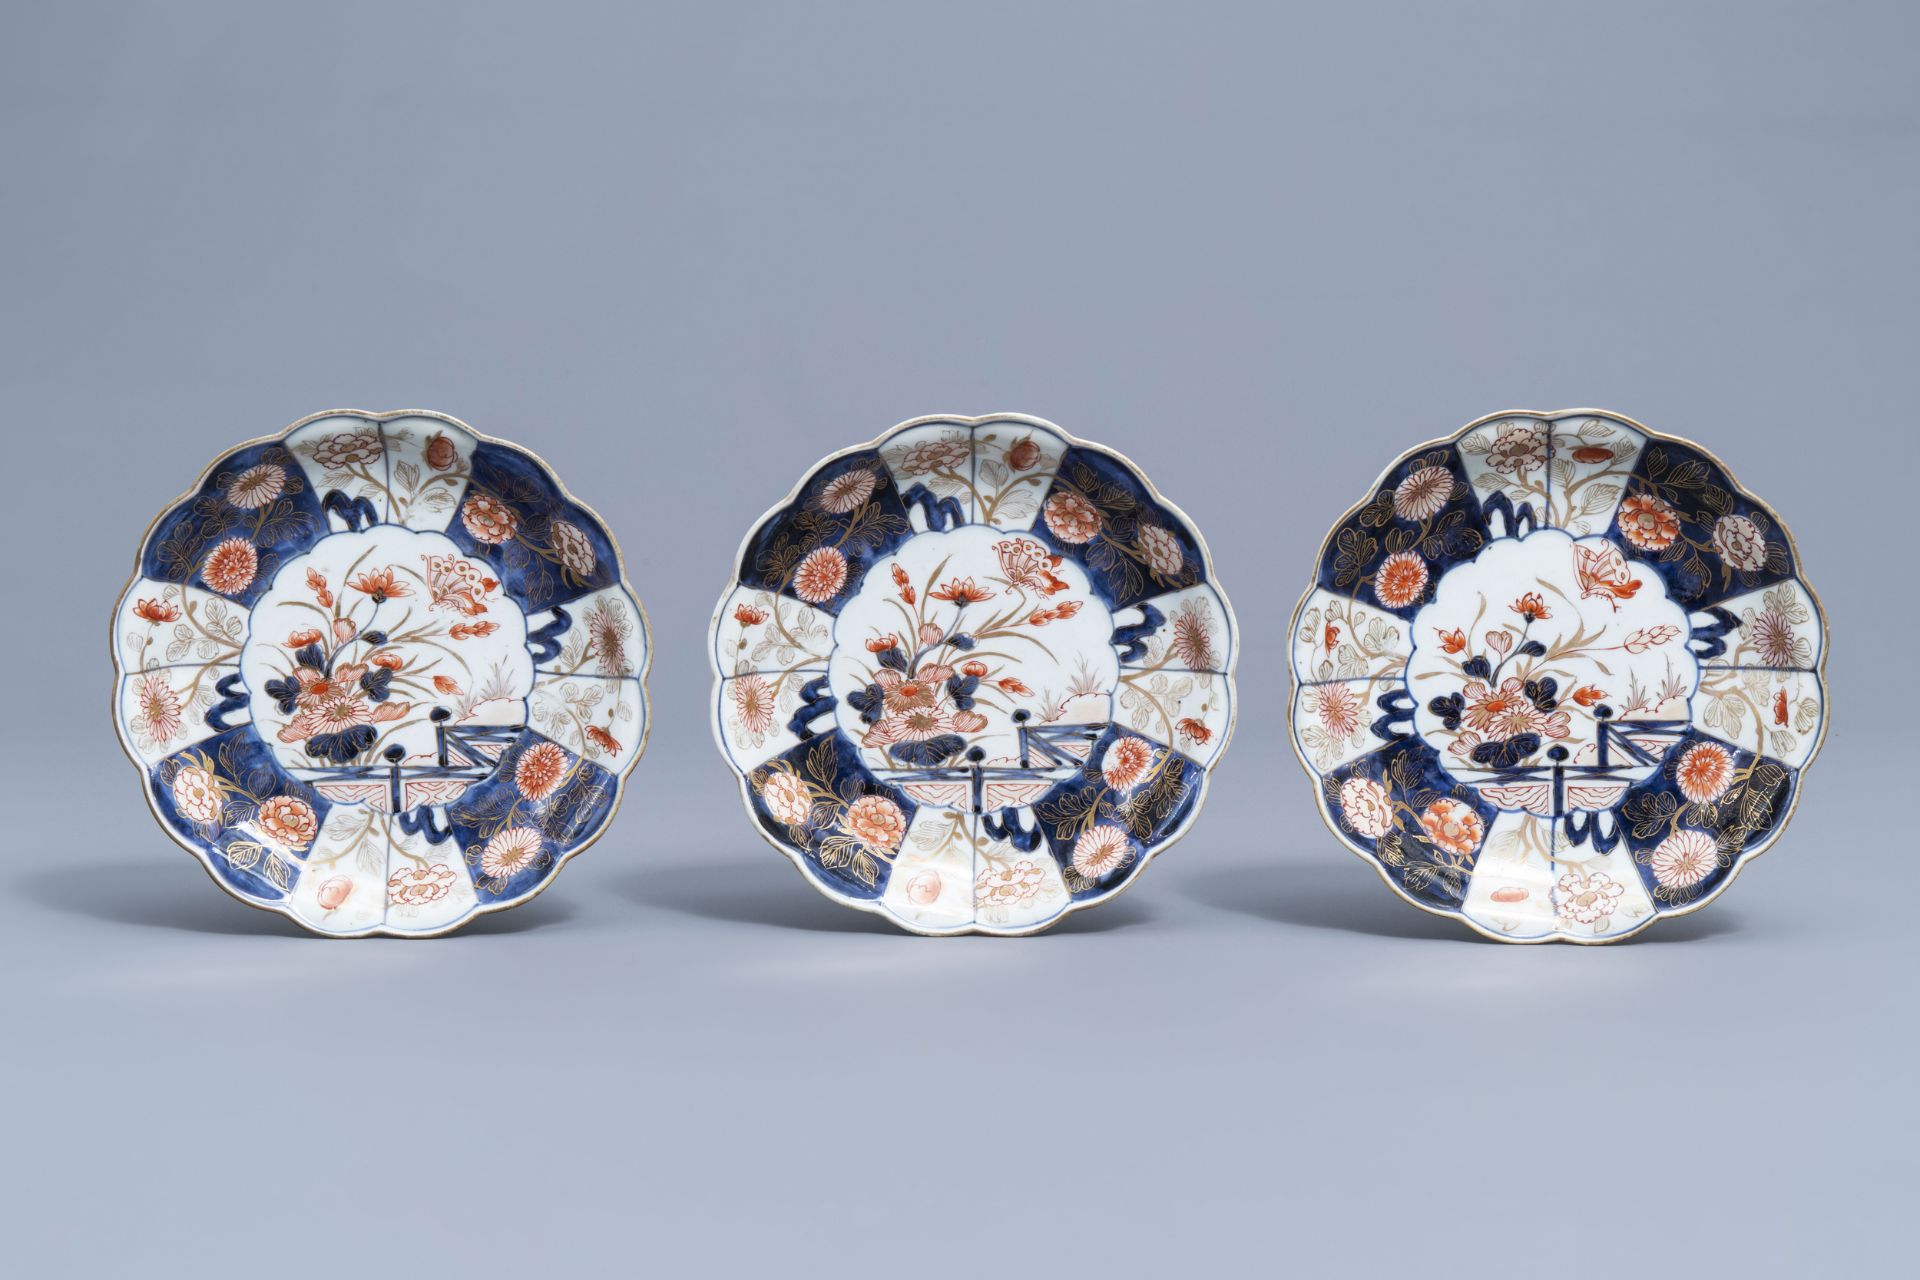 Seven Japanese Imari plates with scalloped rim and floral design, Edo, 18th C. - Image 2 of 7